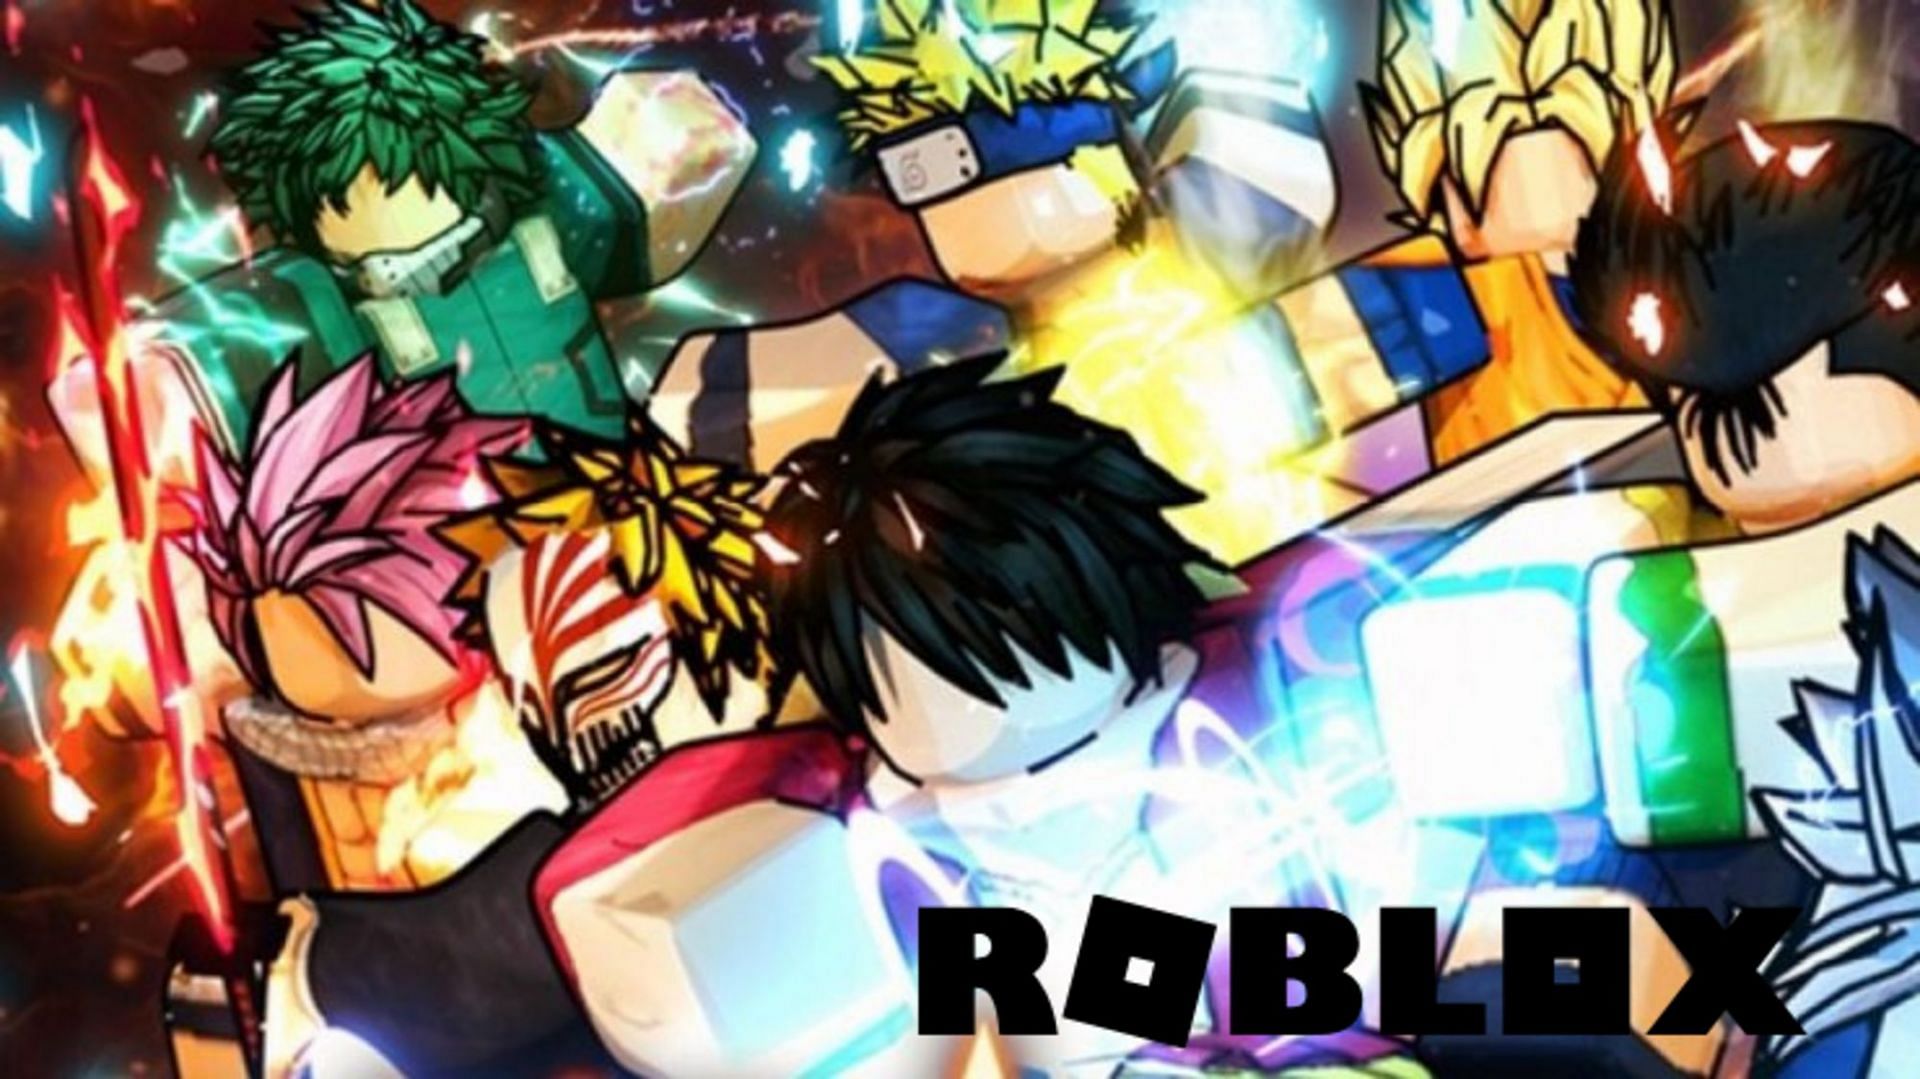 THE BEST NEW BLEACH GAME ON ROBLOX?!